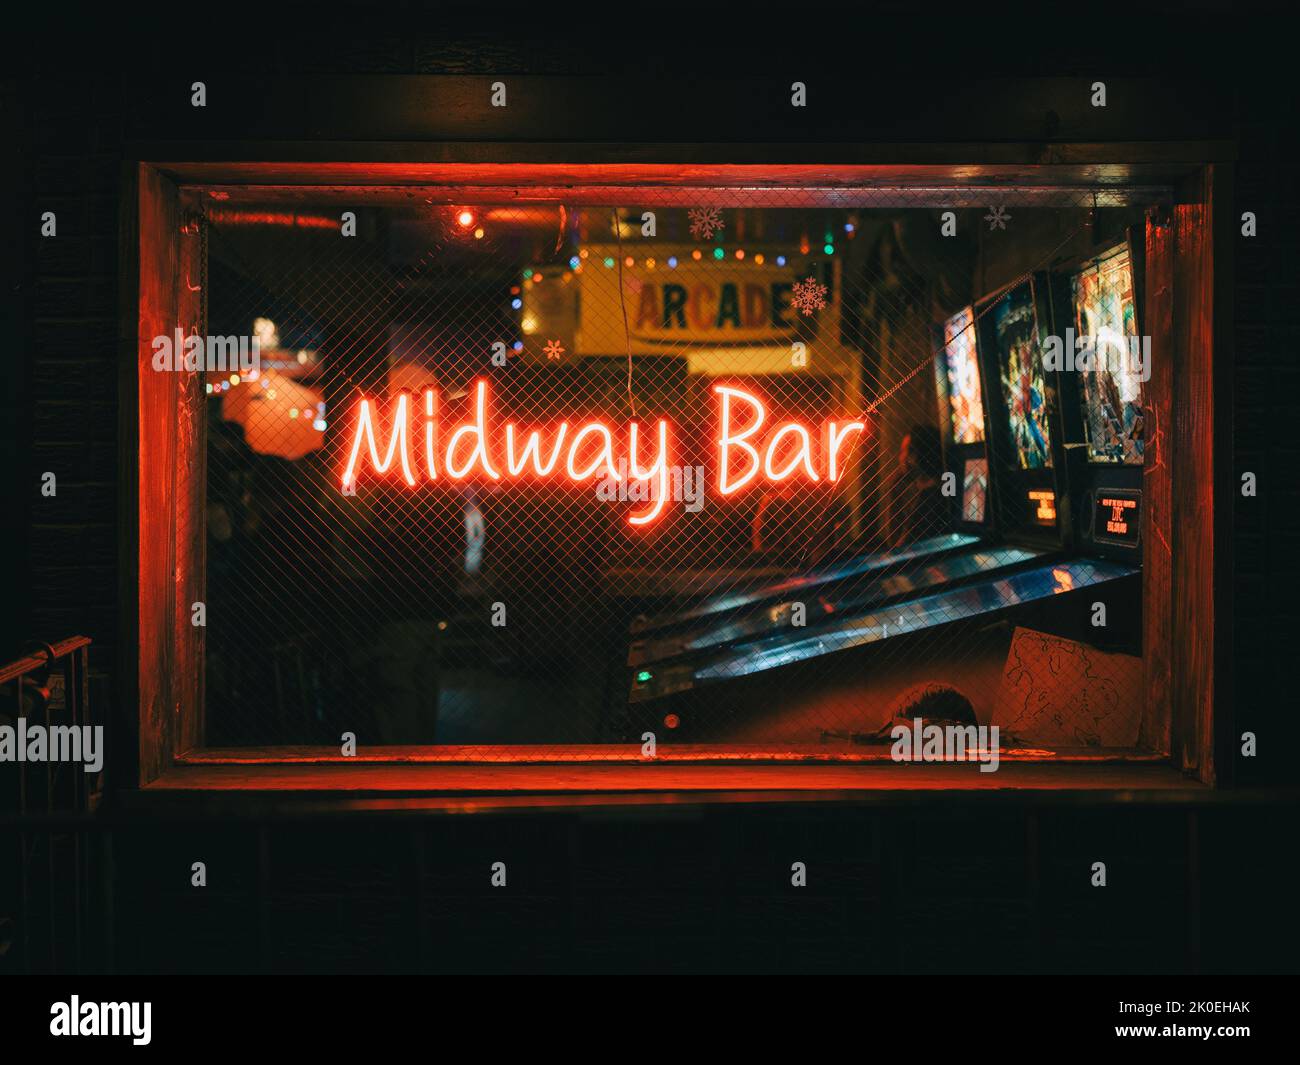 Midway Bar neon sign at night, in Williamsburg, Brooklyn, New York Stock Photo